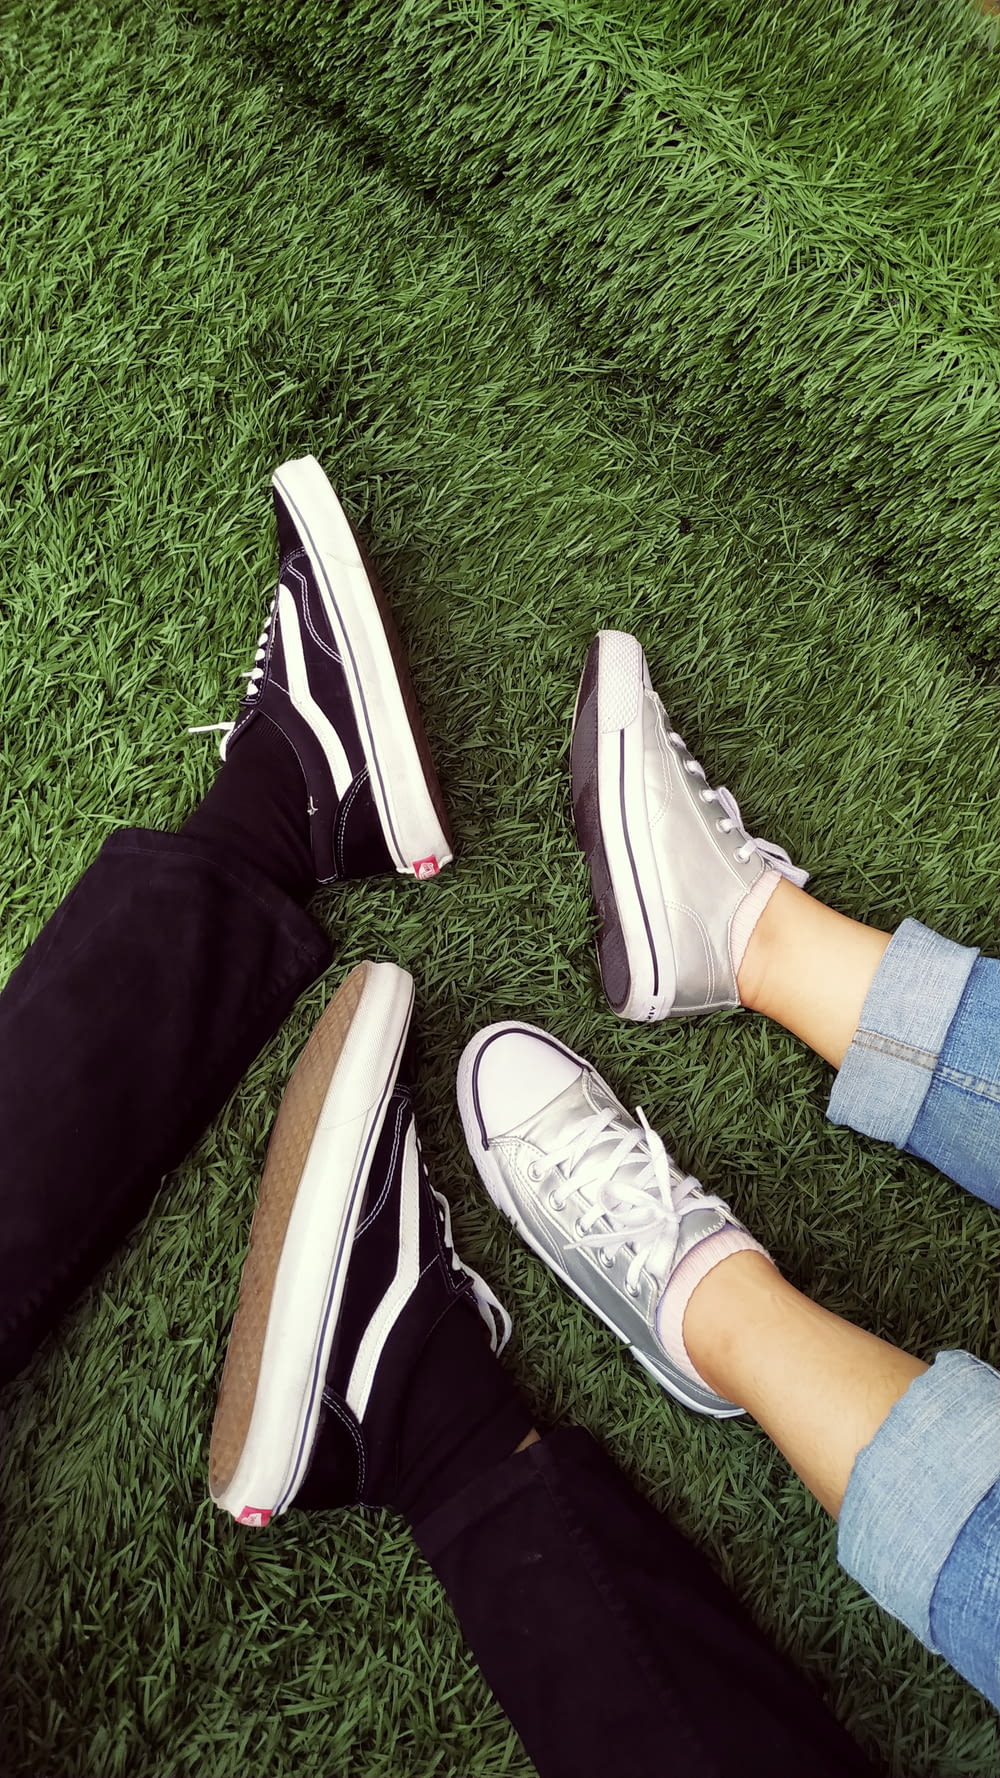 two persons wearing sneakers